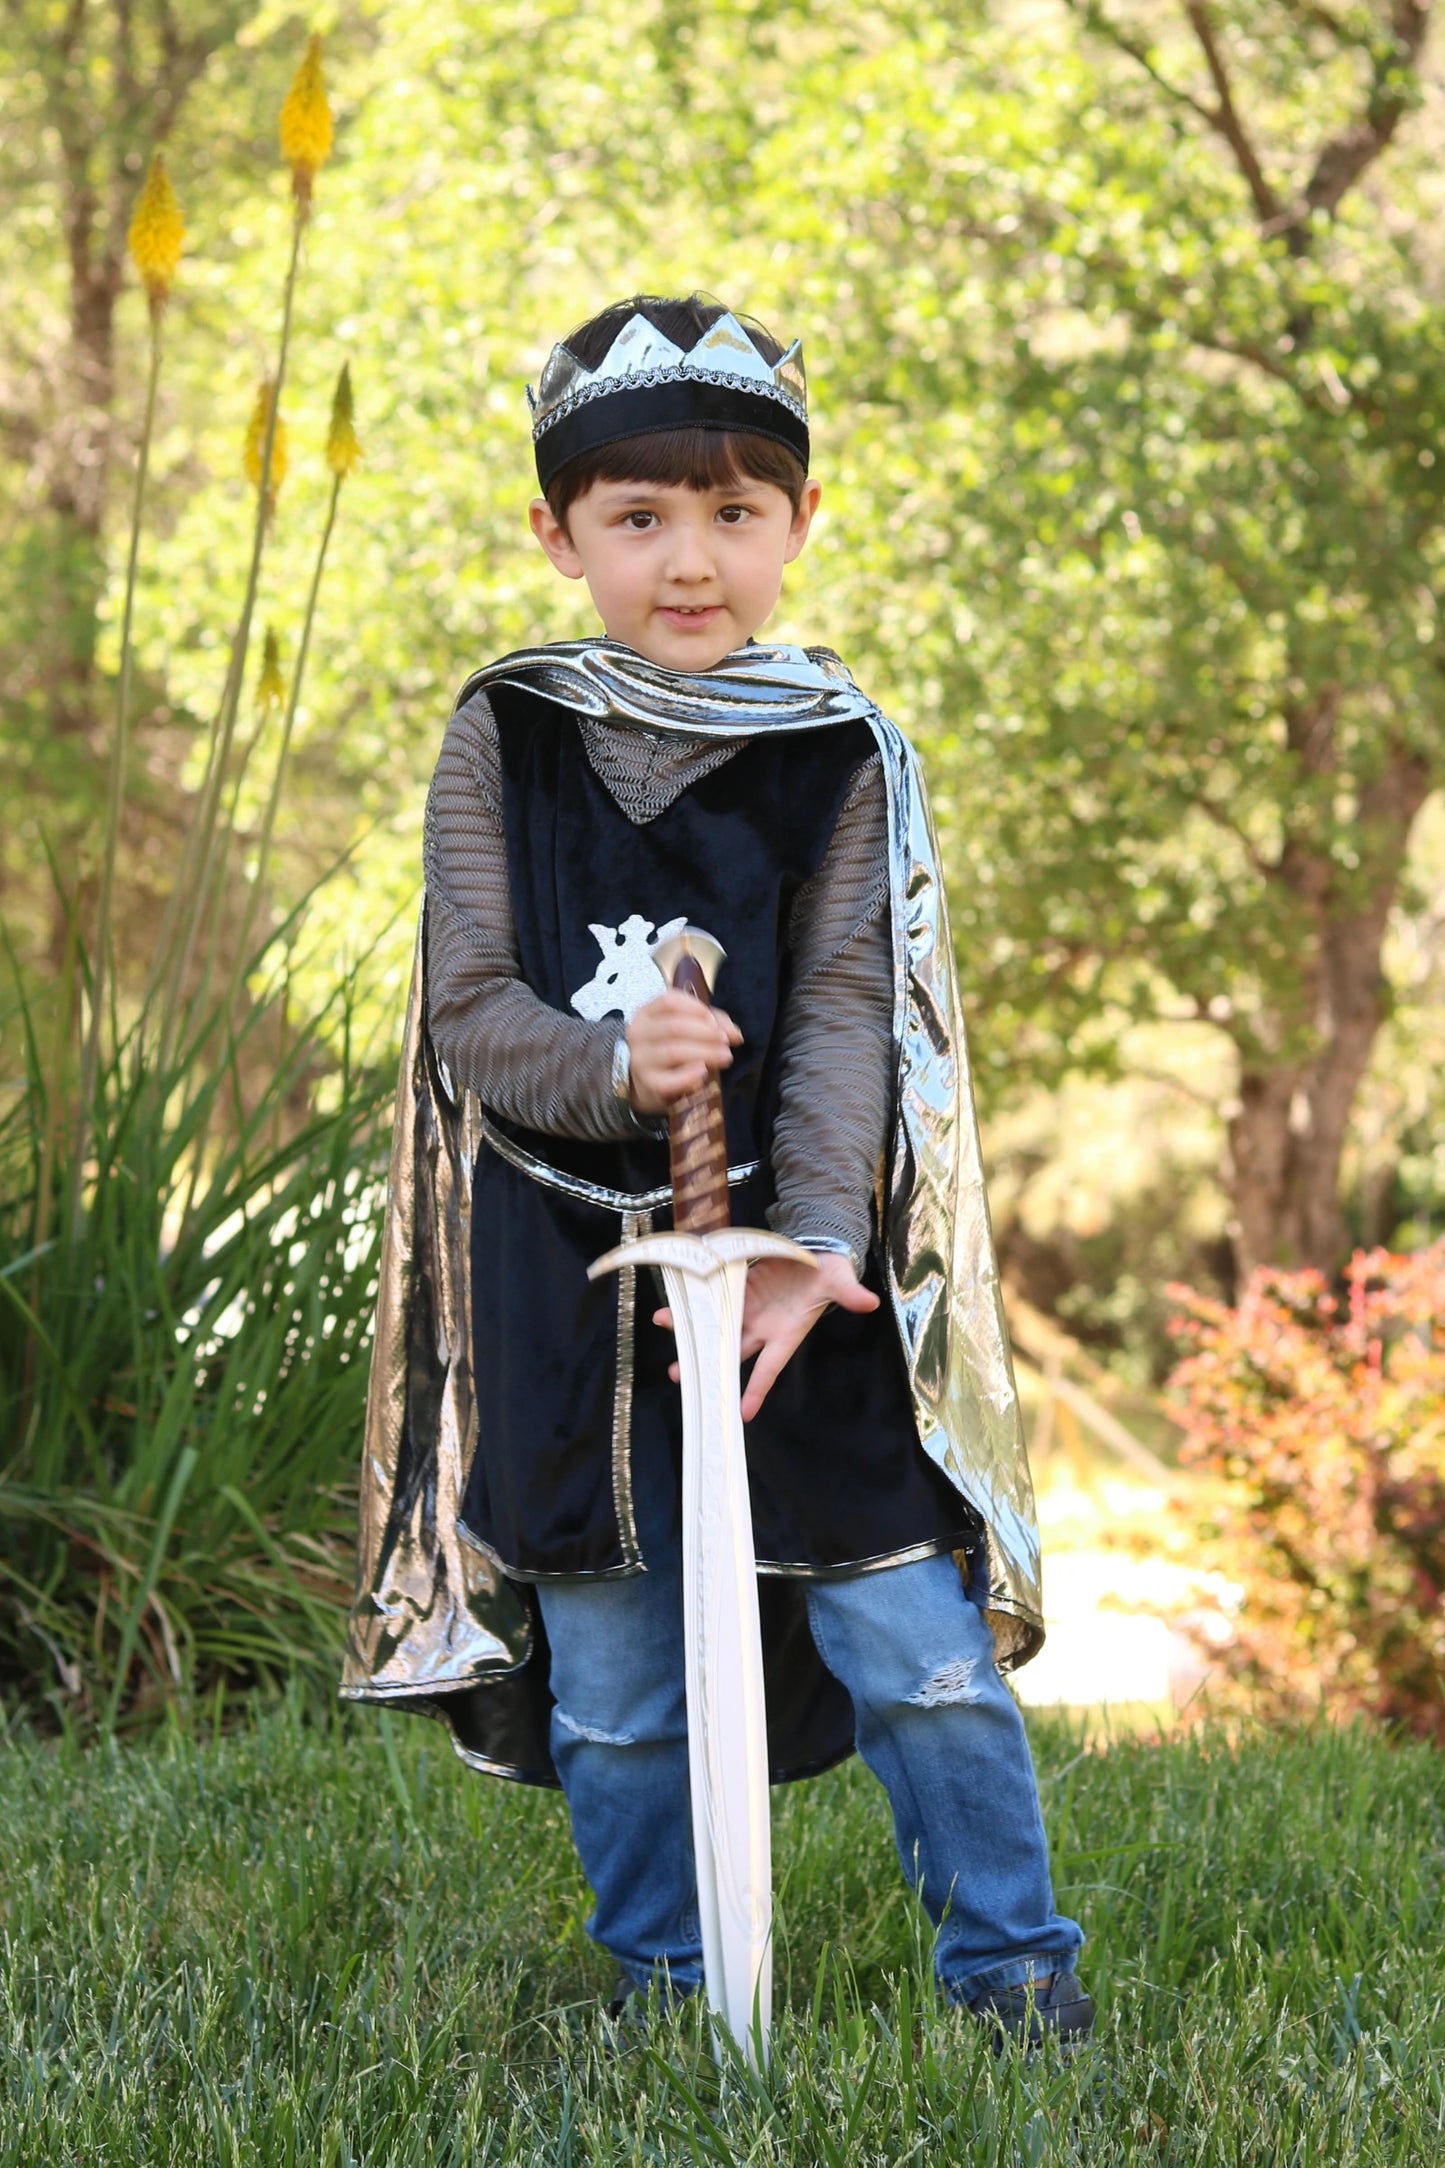 Dress Up - Silver Knight Set: Tunic, Cape, Crown